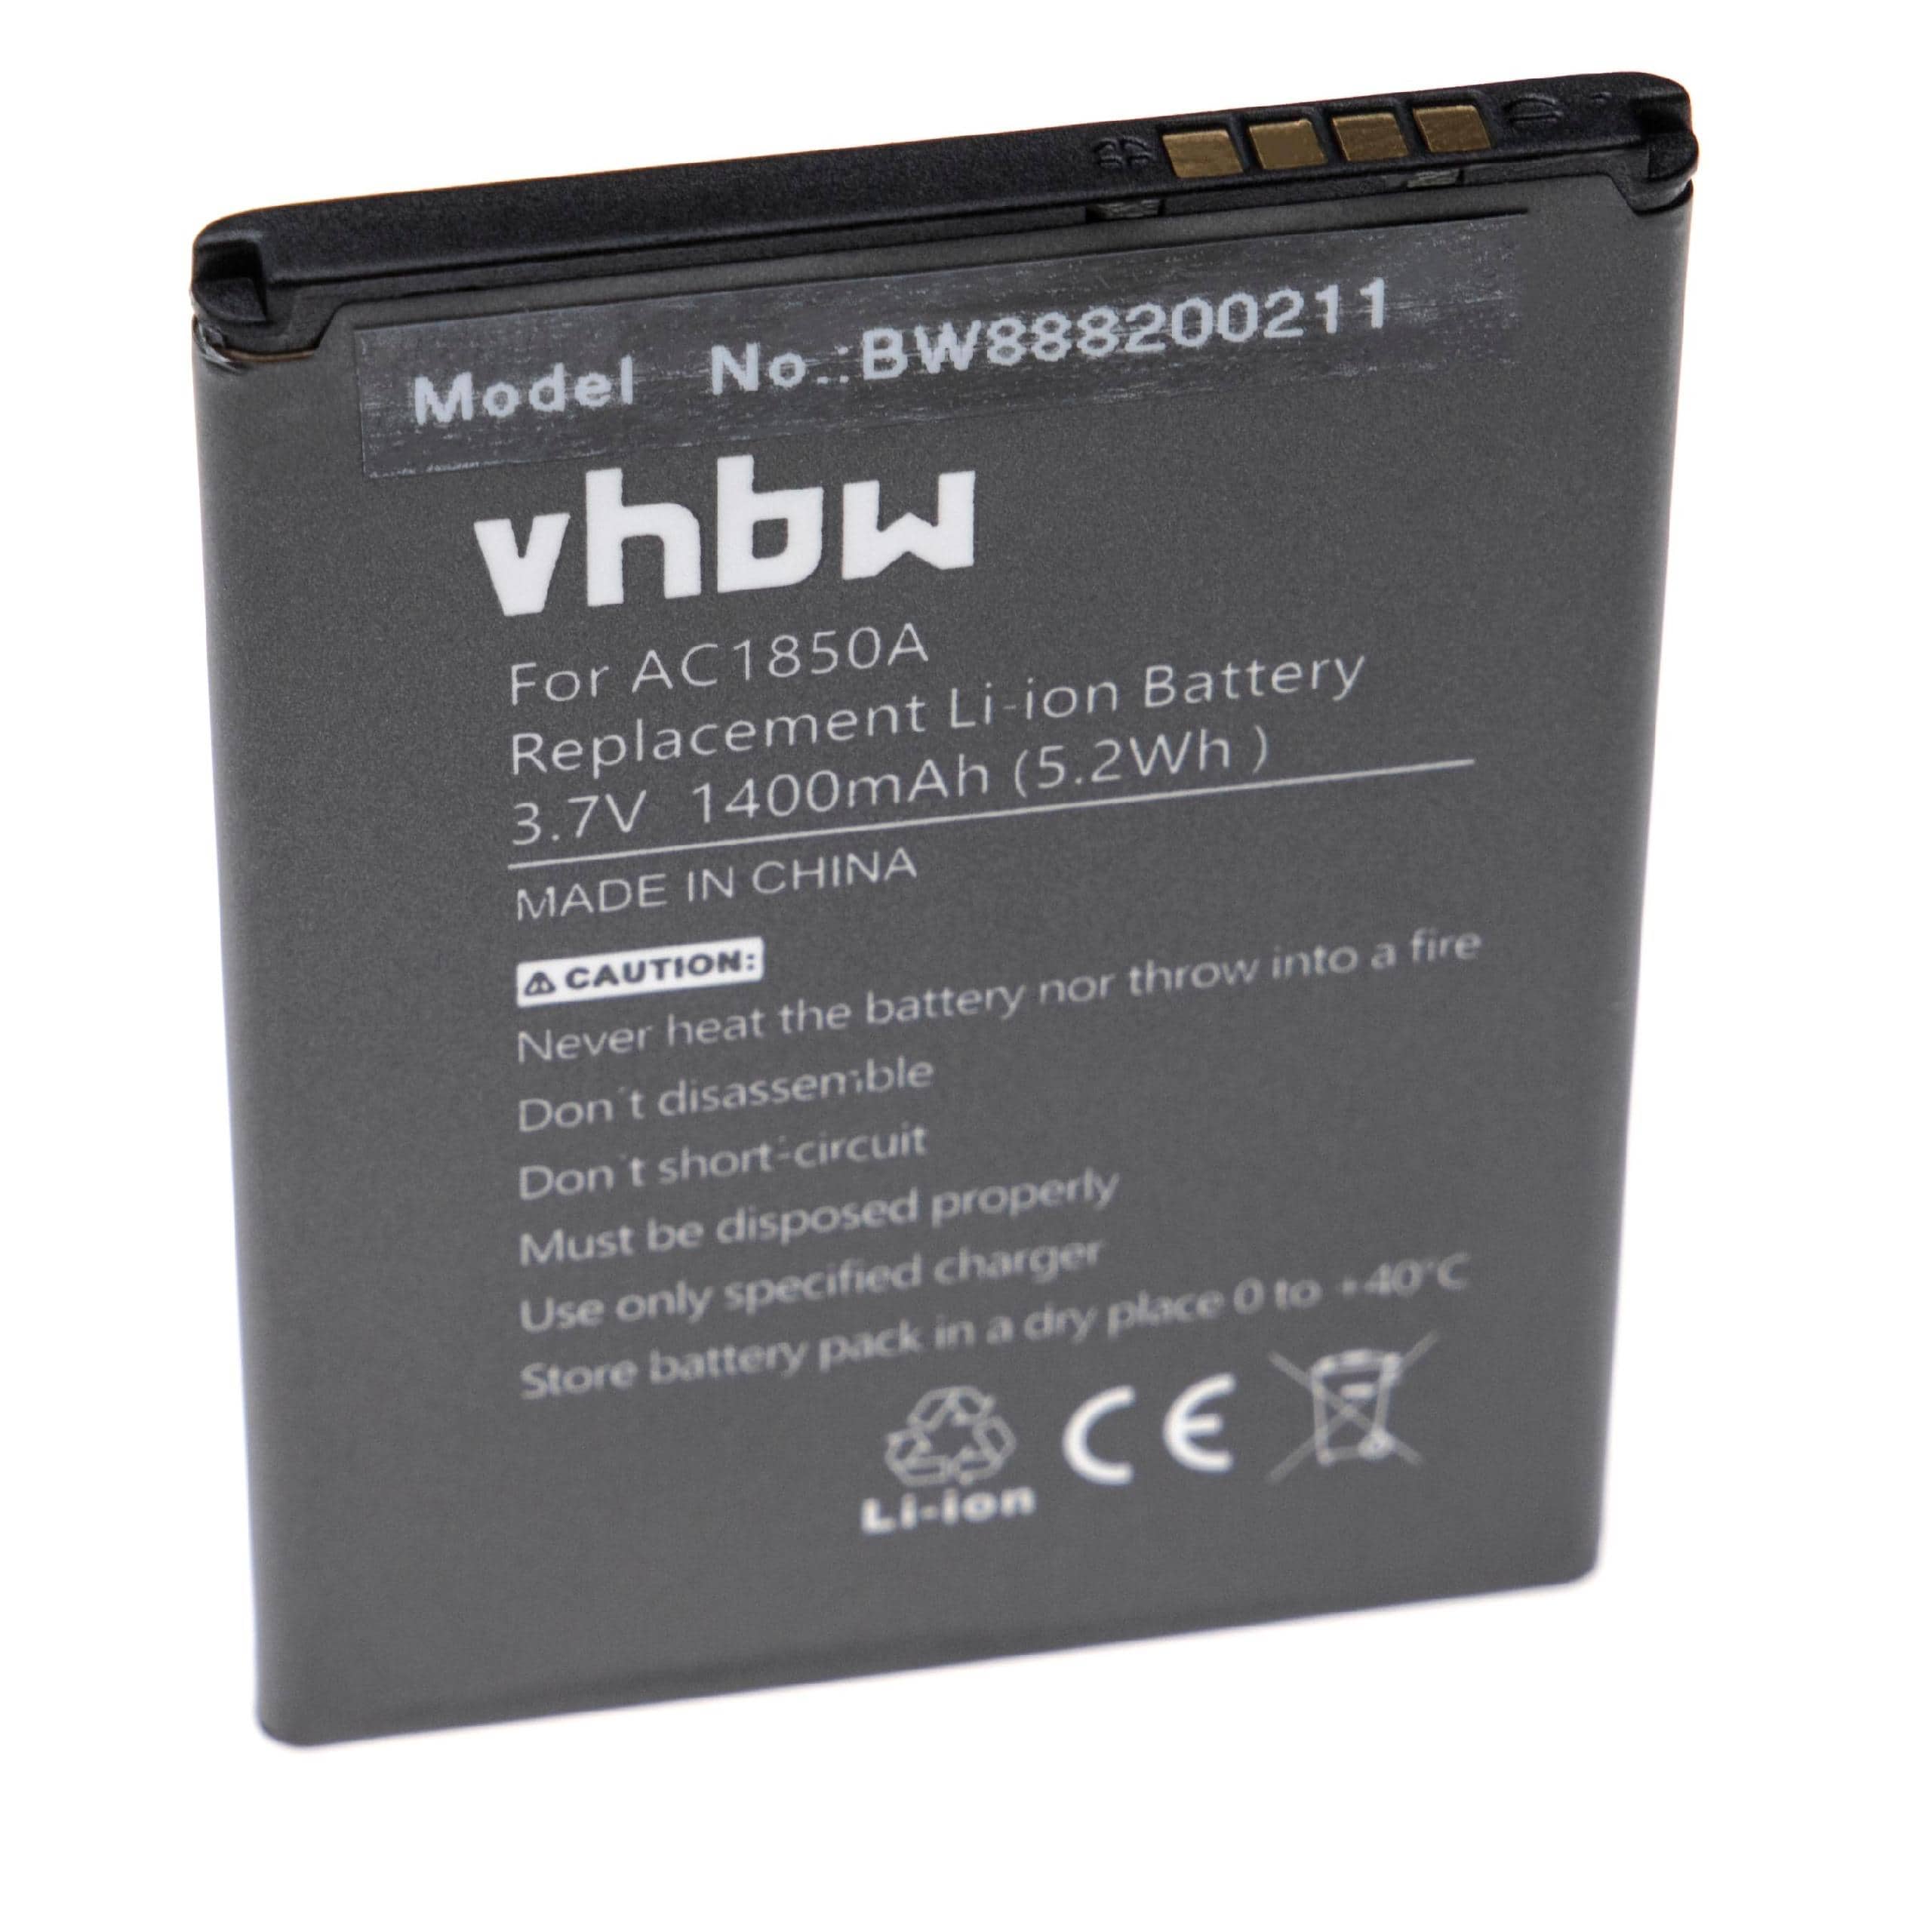 Mobile Phone Battery Replacement for Archos AC1850A, TBW5986, AC300CA - 1400mAh 3.7V Li-Ion